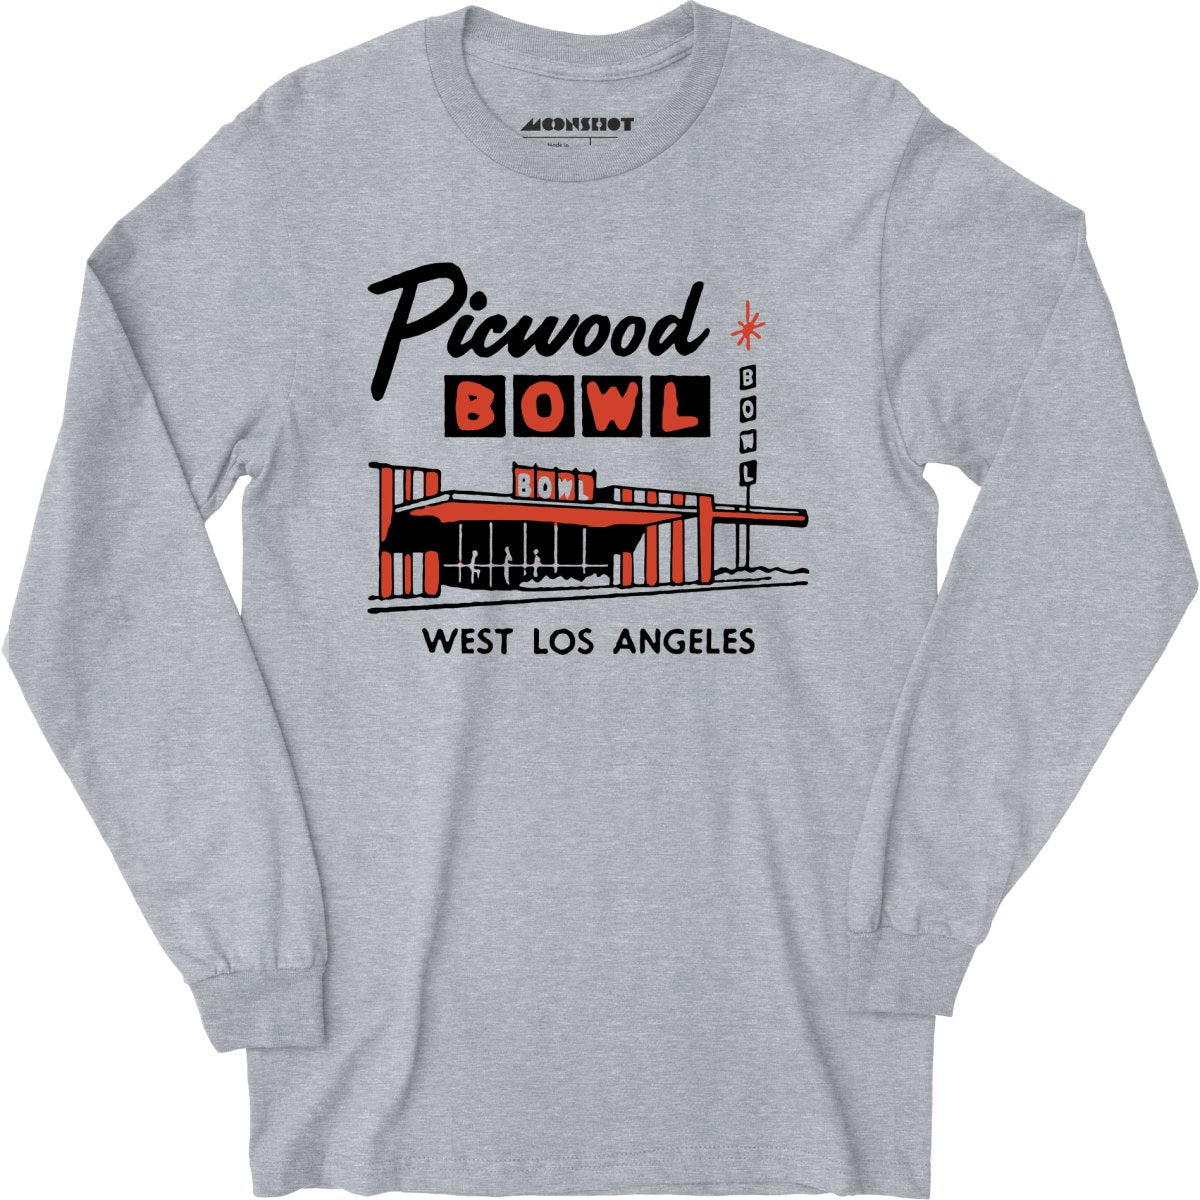 Picwood Bowl - Los Angeles, CA - Vintage Bowling Alley - Long Sleeve T-Shirt